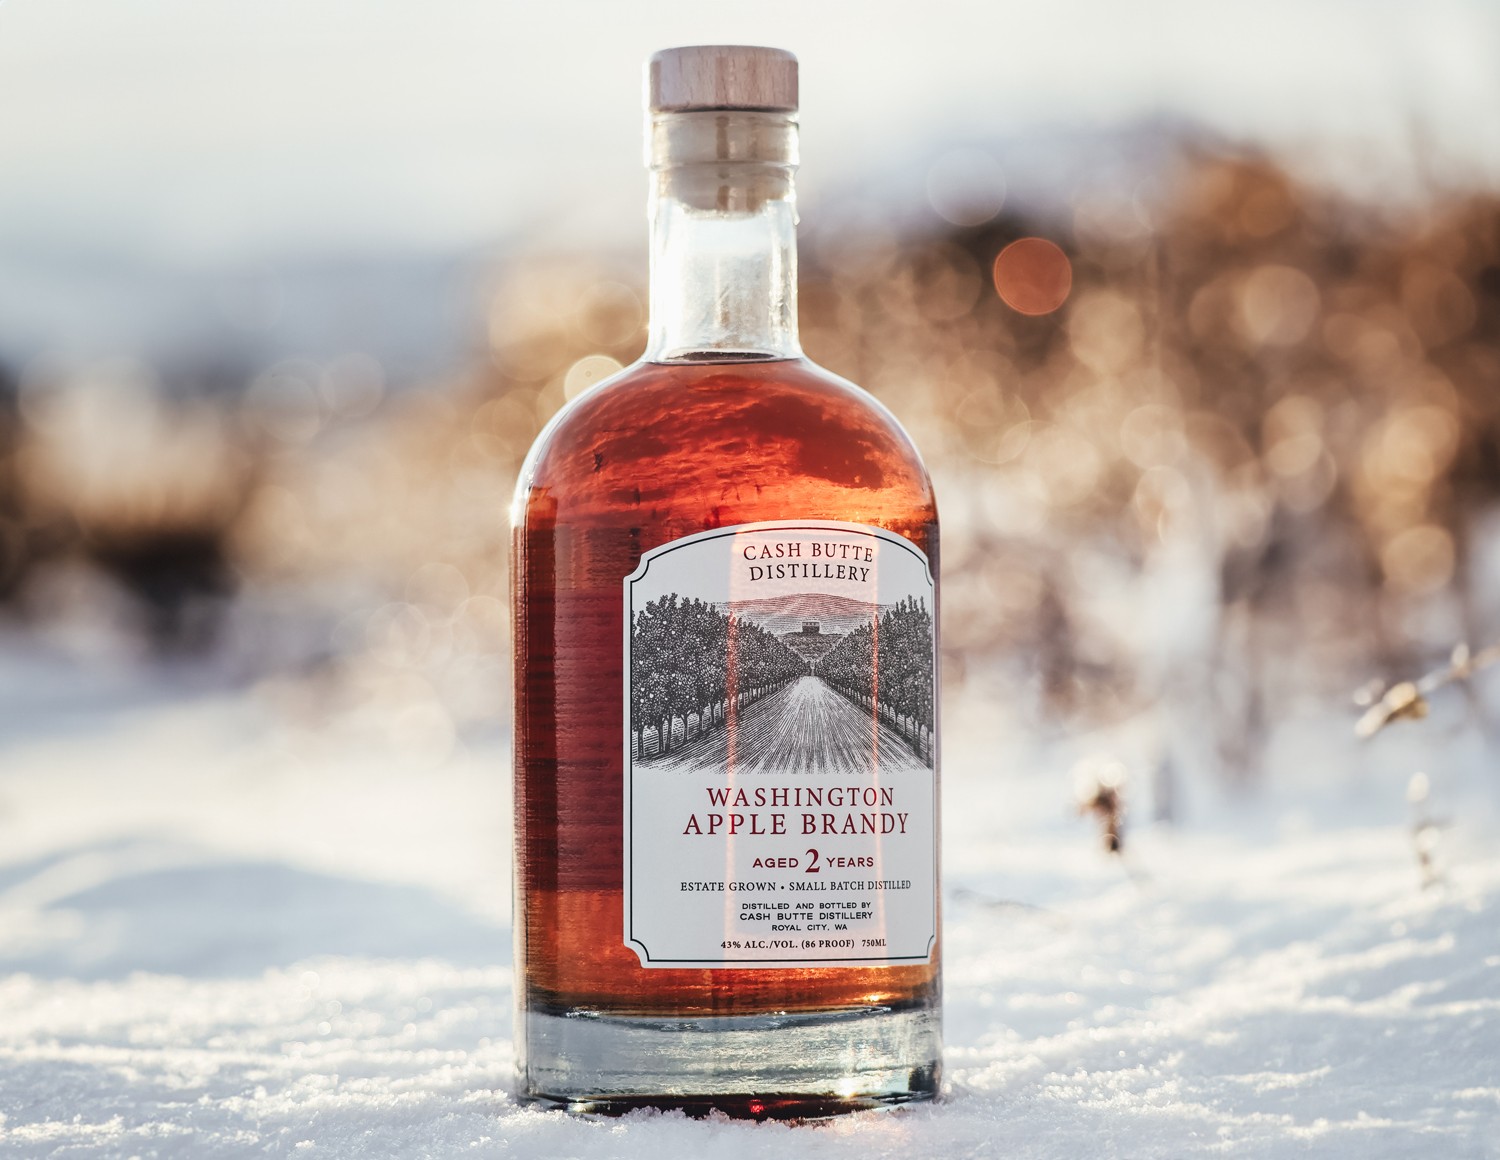 Imperfect fruit is the key to creating the perfect spirits at Cash Butte Distillery